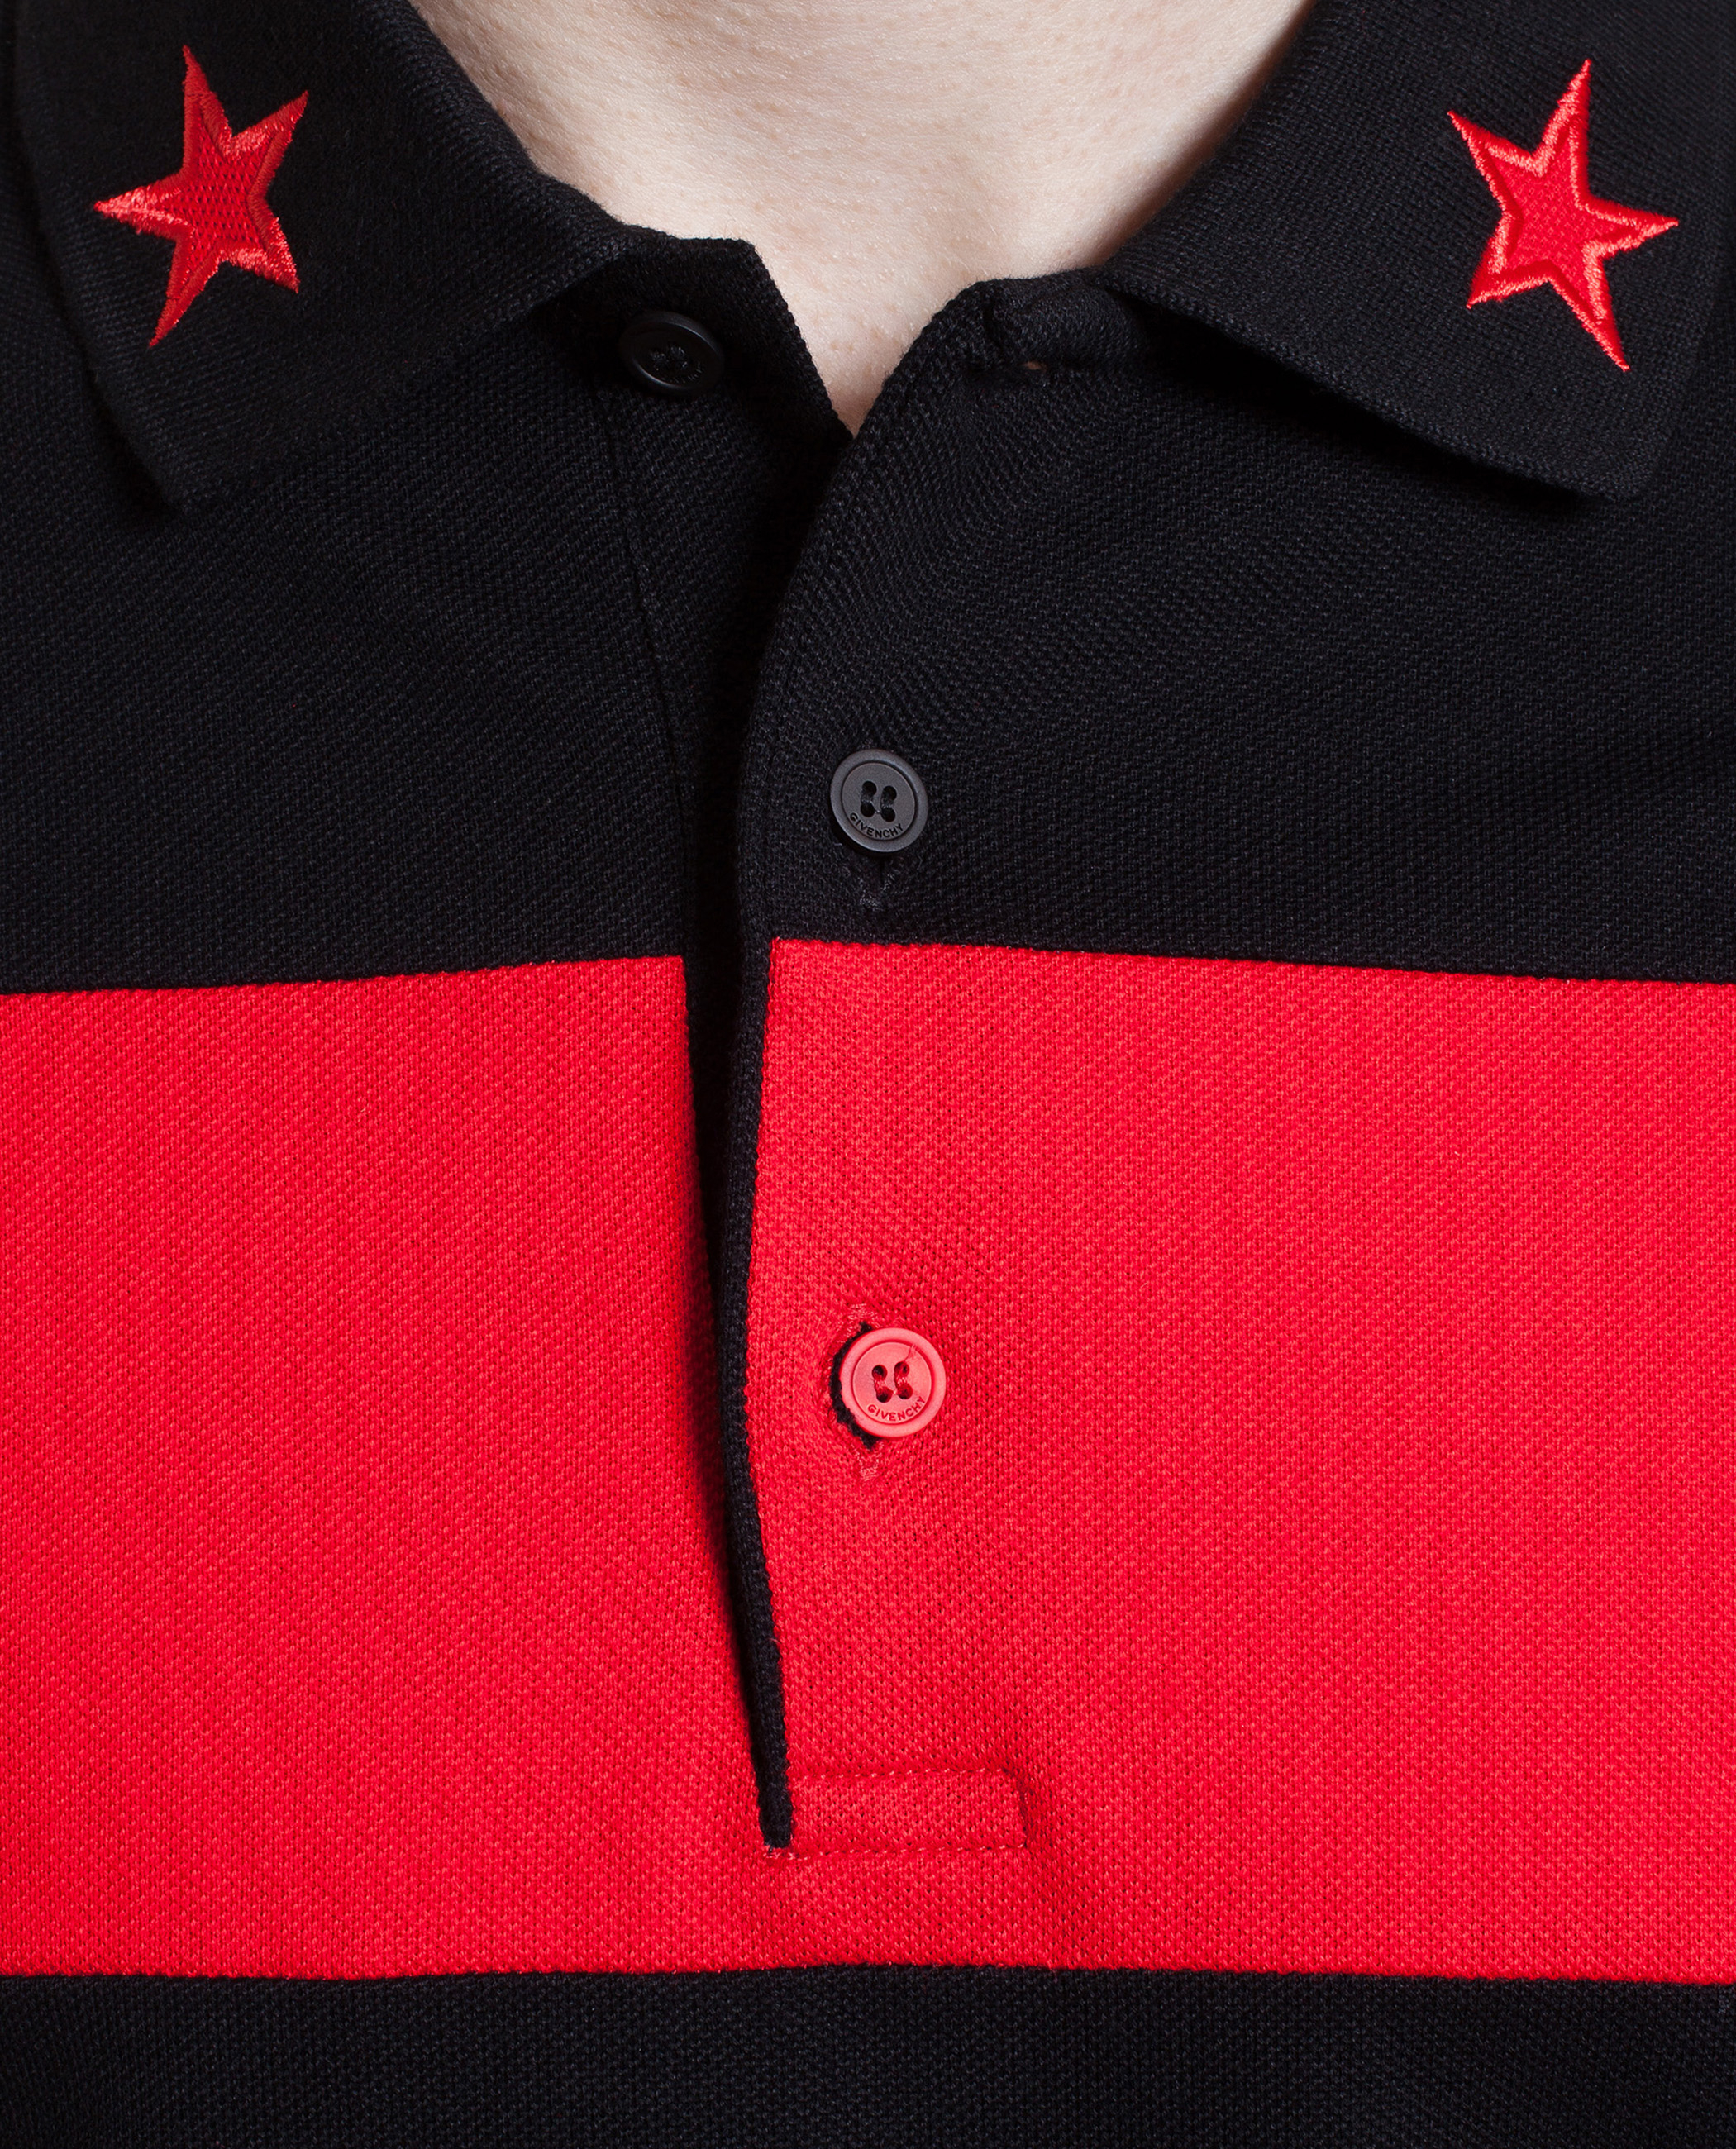 Givenchy Striped Polo Shirt With Star Collar in Red for Men | Lyst